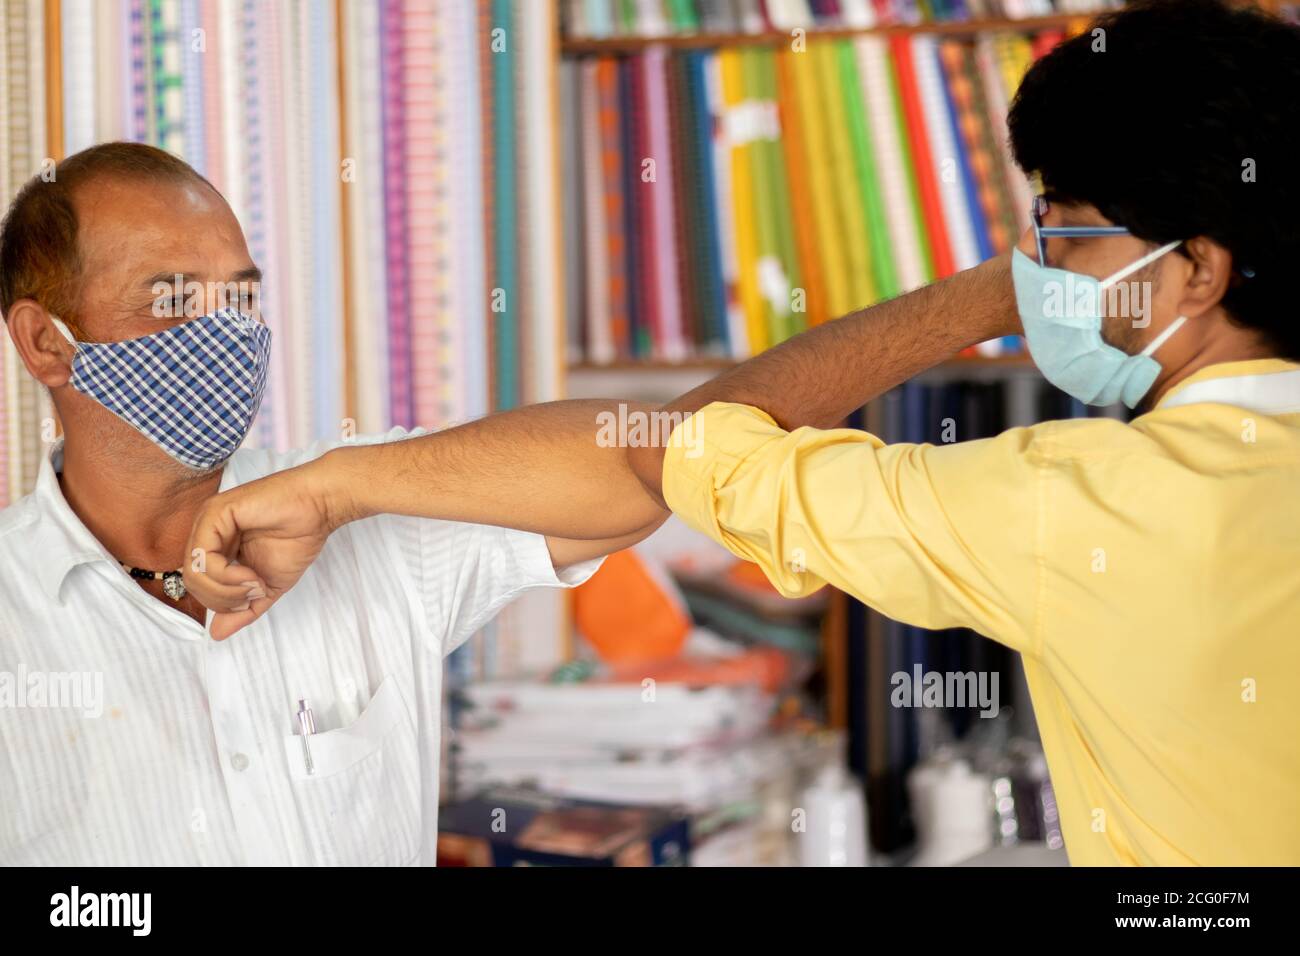 Shopkeeper greeting customer with elbow bump at cloth store - concept of people avoiding hand shakes at business places to stop spreading coronavirus Stock Photo